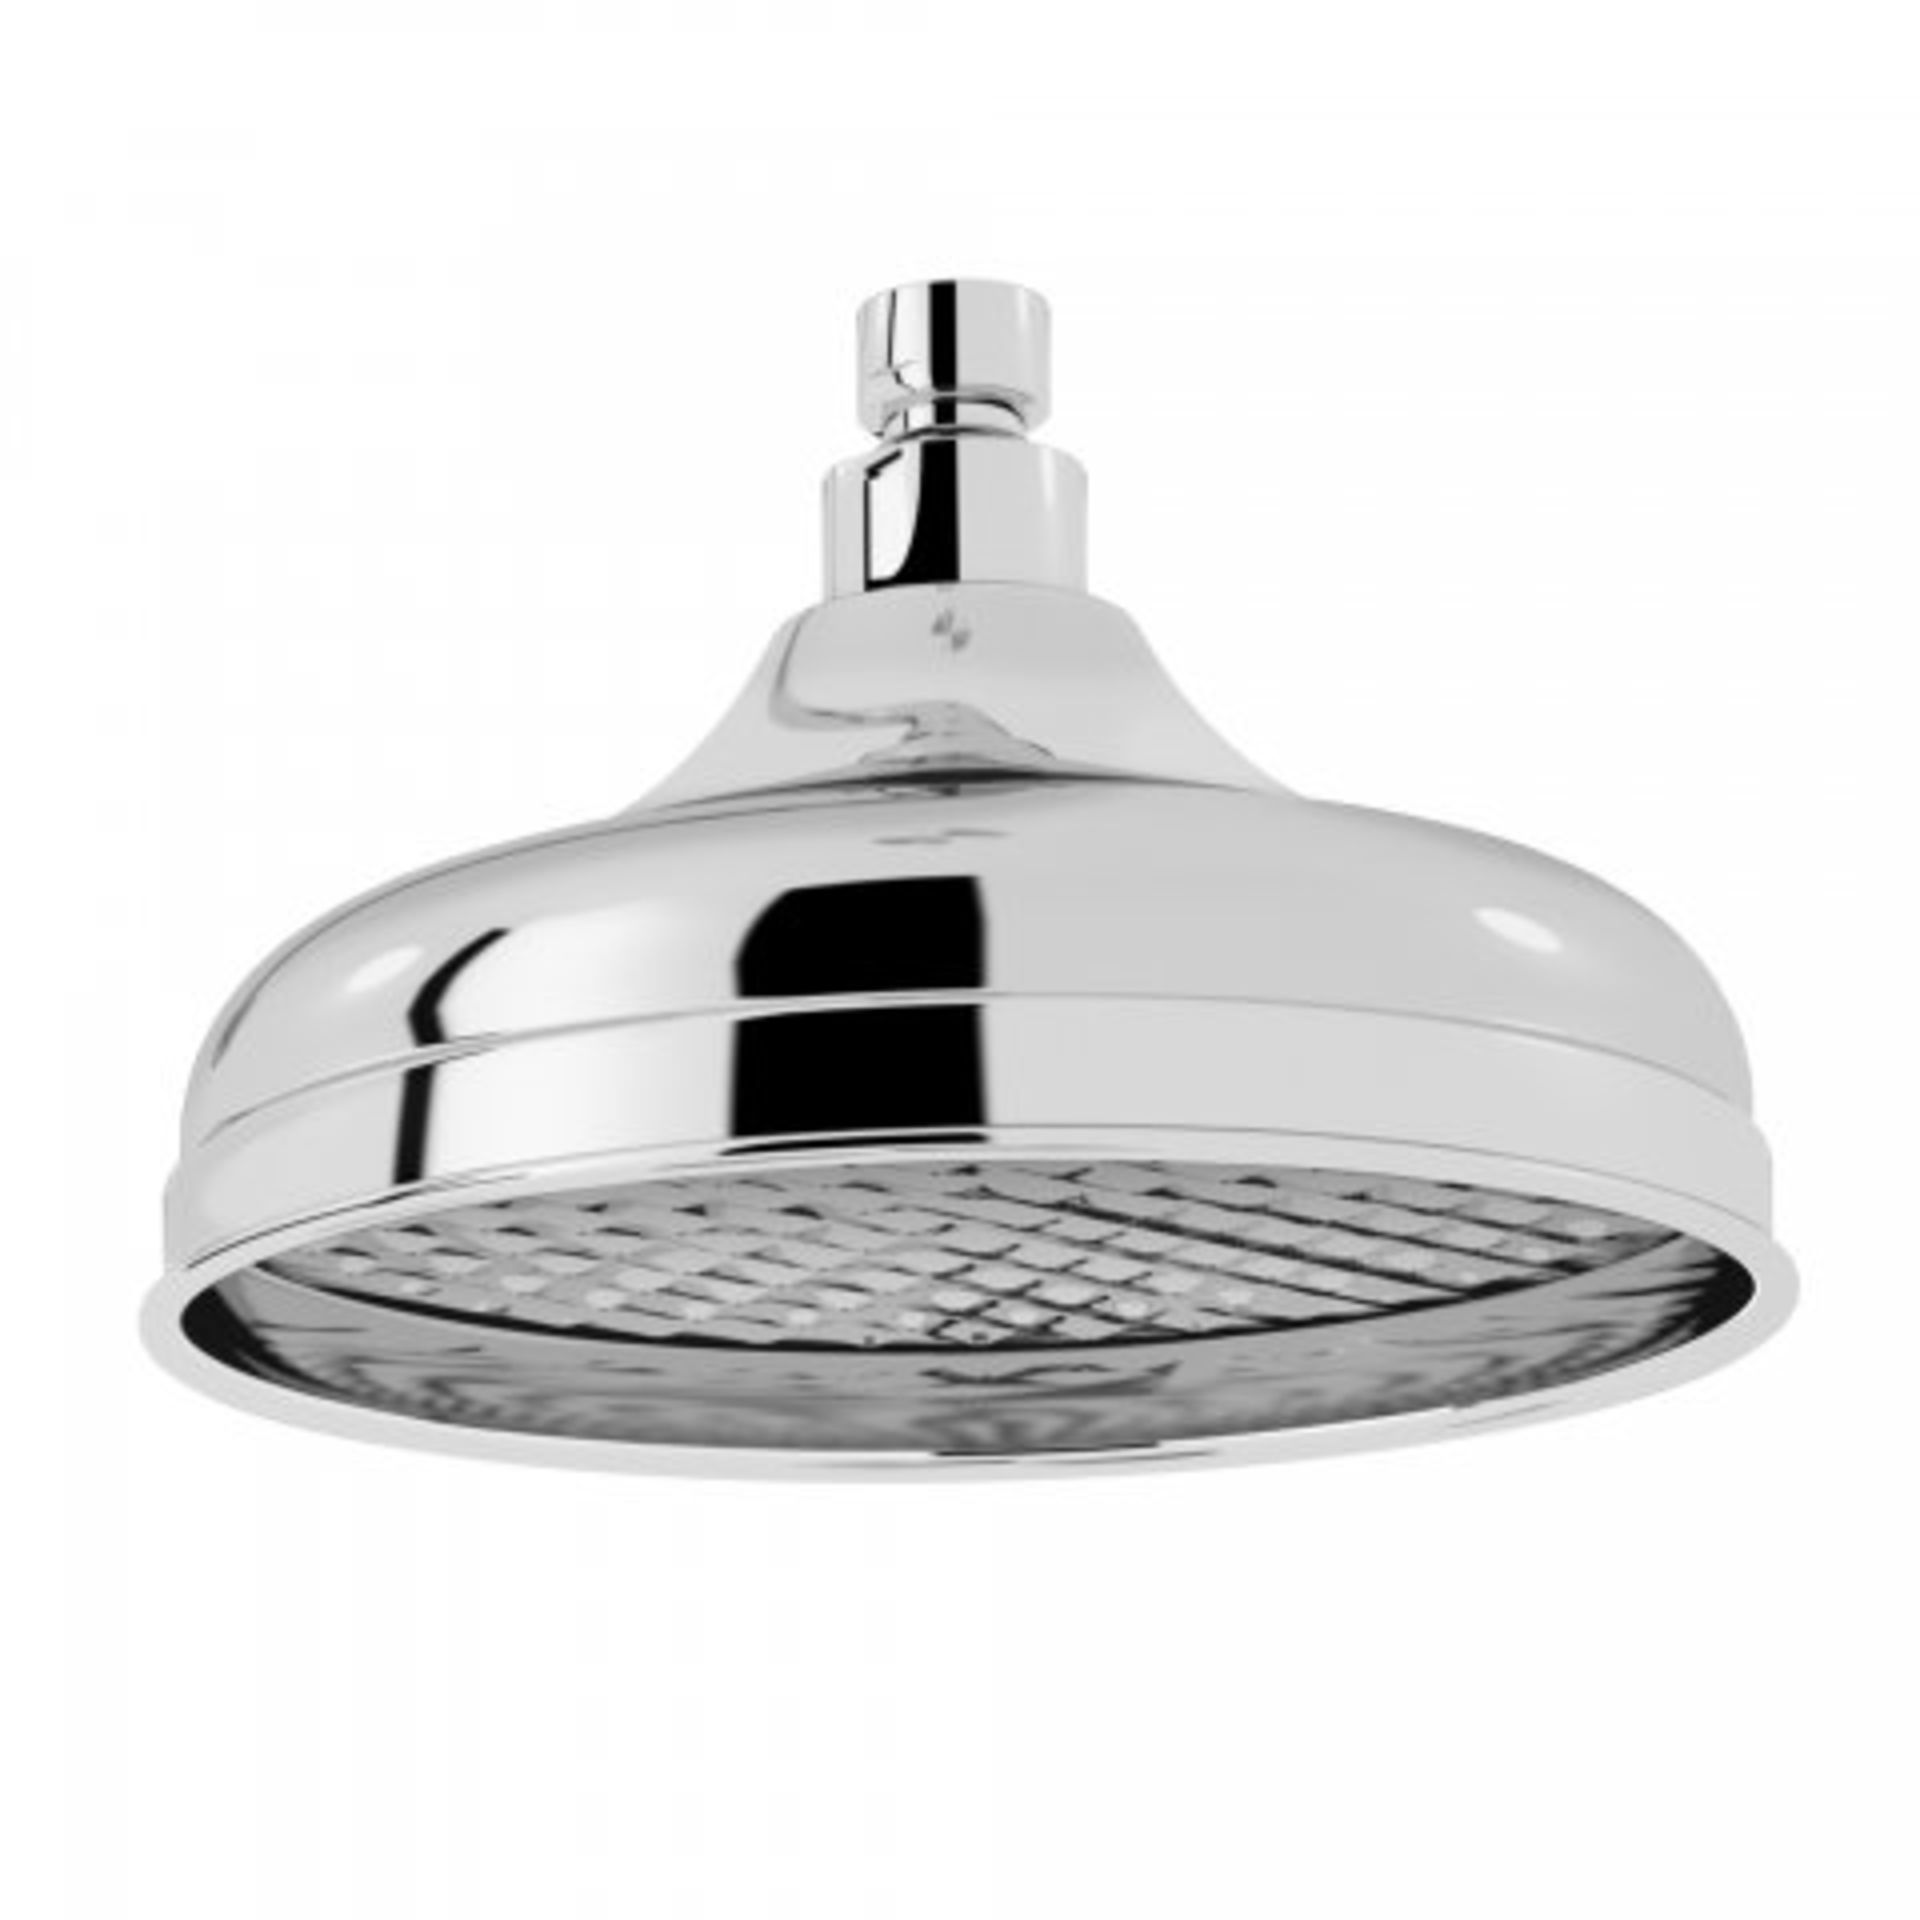 (J18) 205mm Traditional Rain Chrome Plated Solid Brass Shower Head - Finest Range Our stunning 205mm